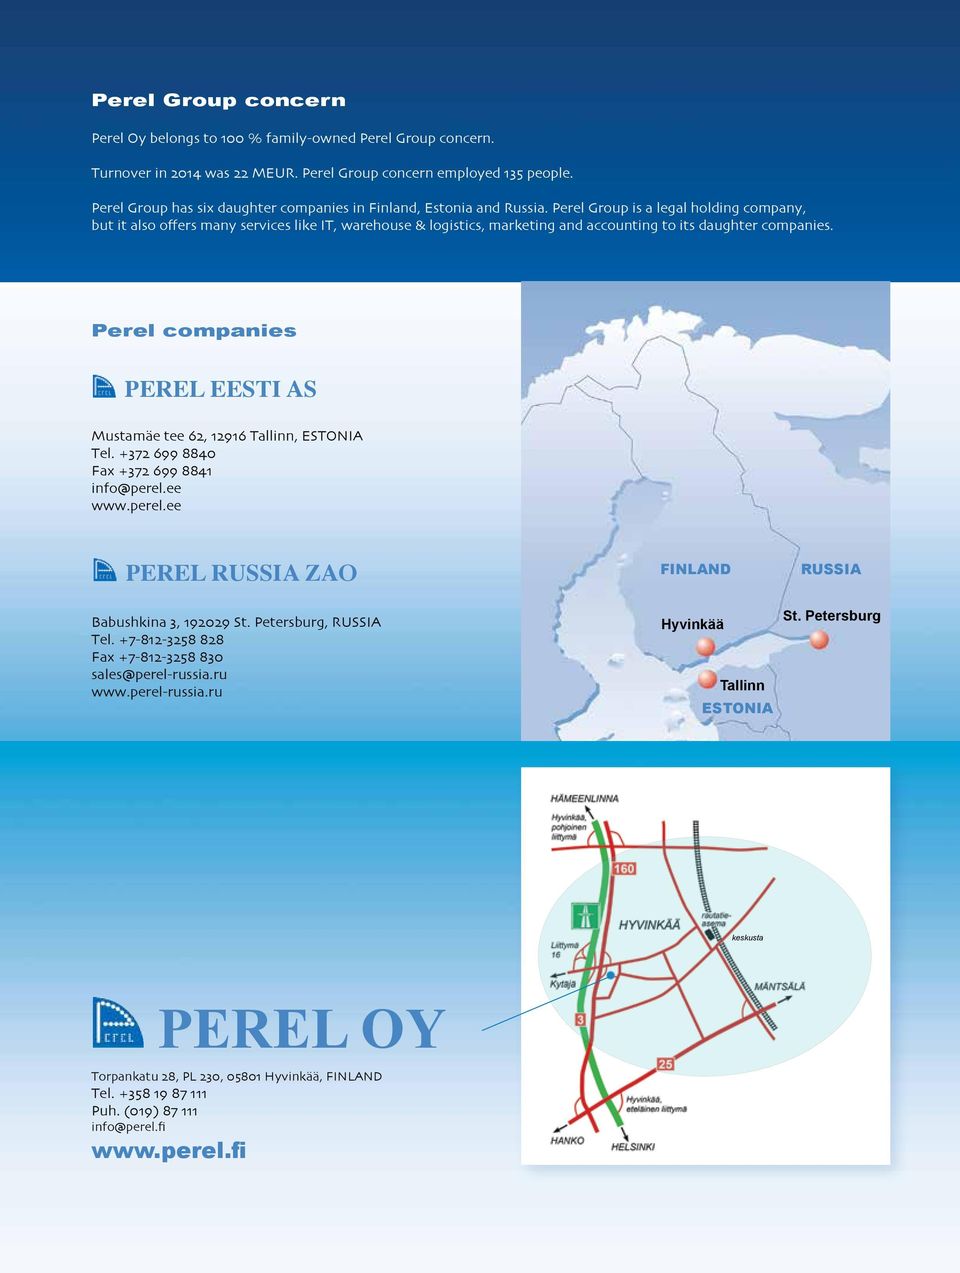 Perel Group is a legal holding company, but it also offers many services like IT, warehouse & logistics, marketing and accounting to its daughter companies.